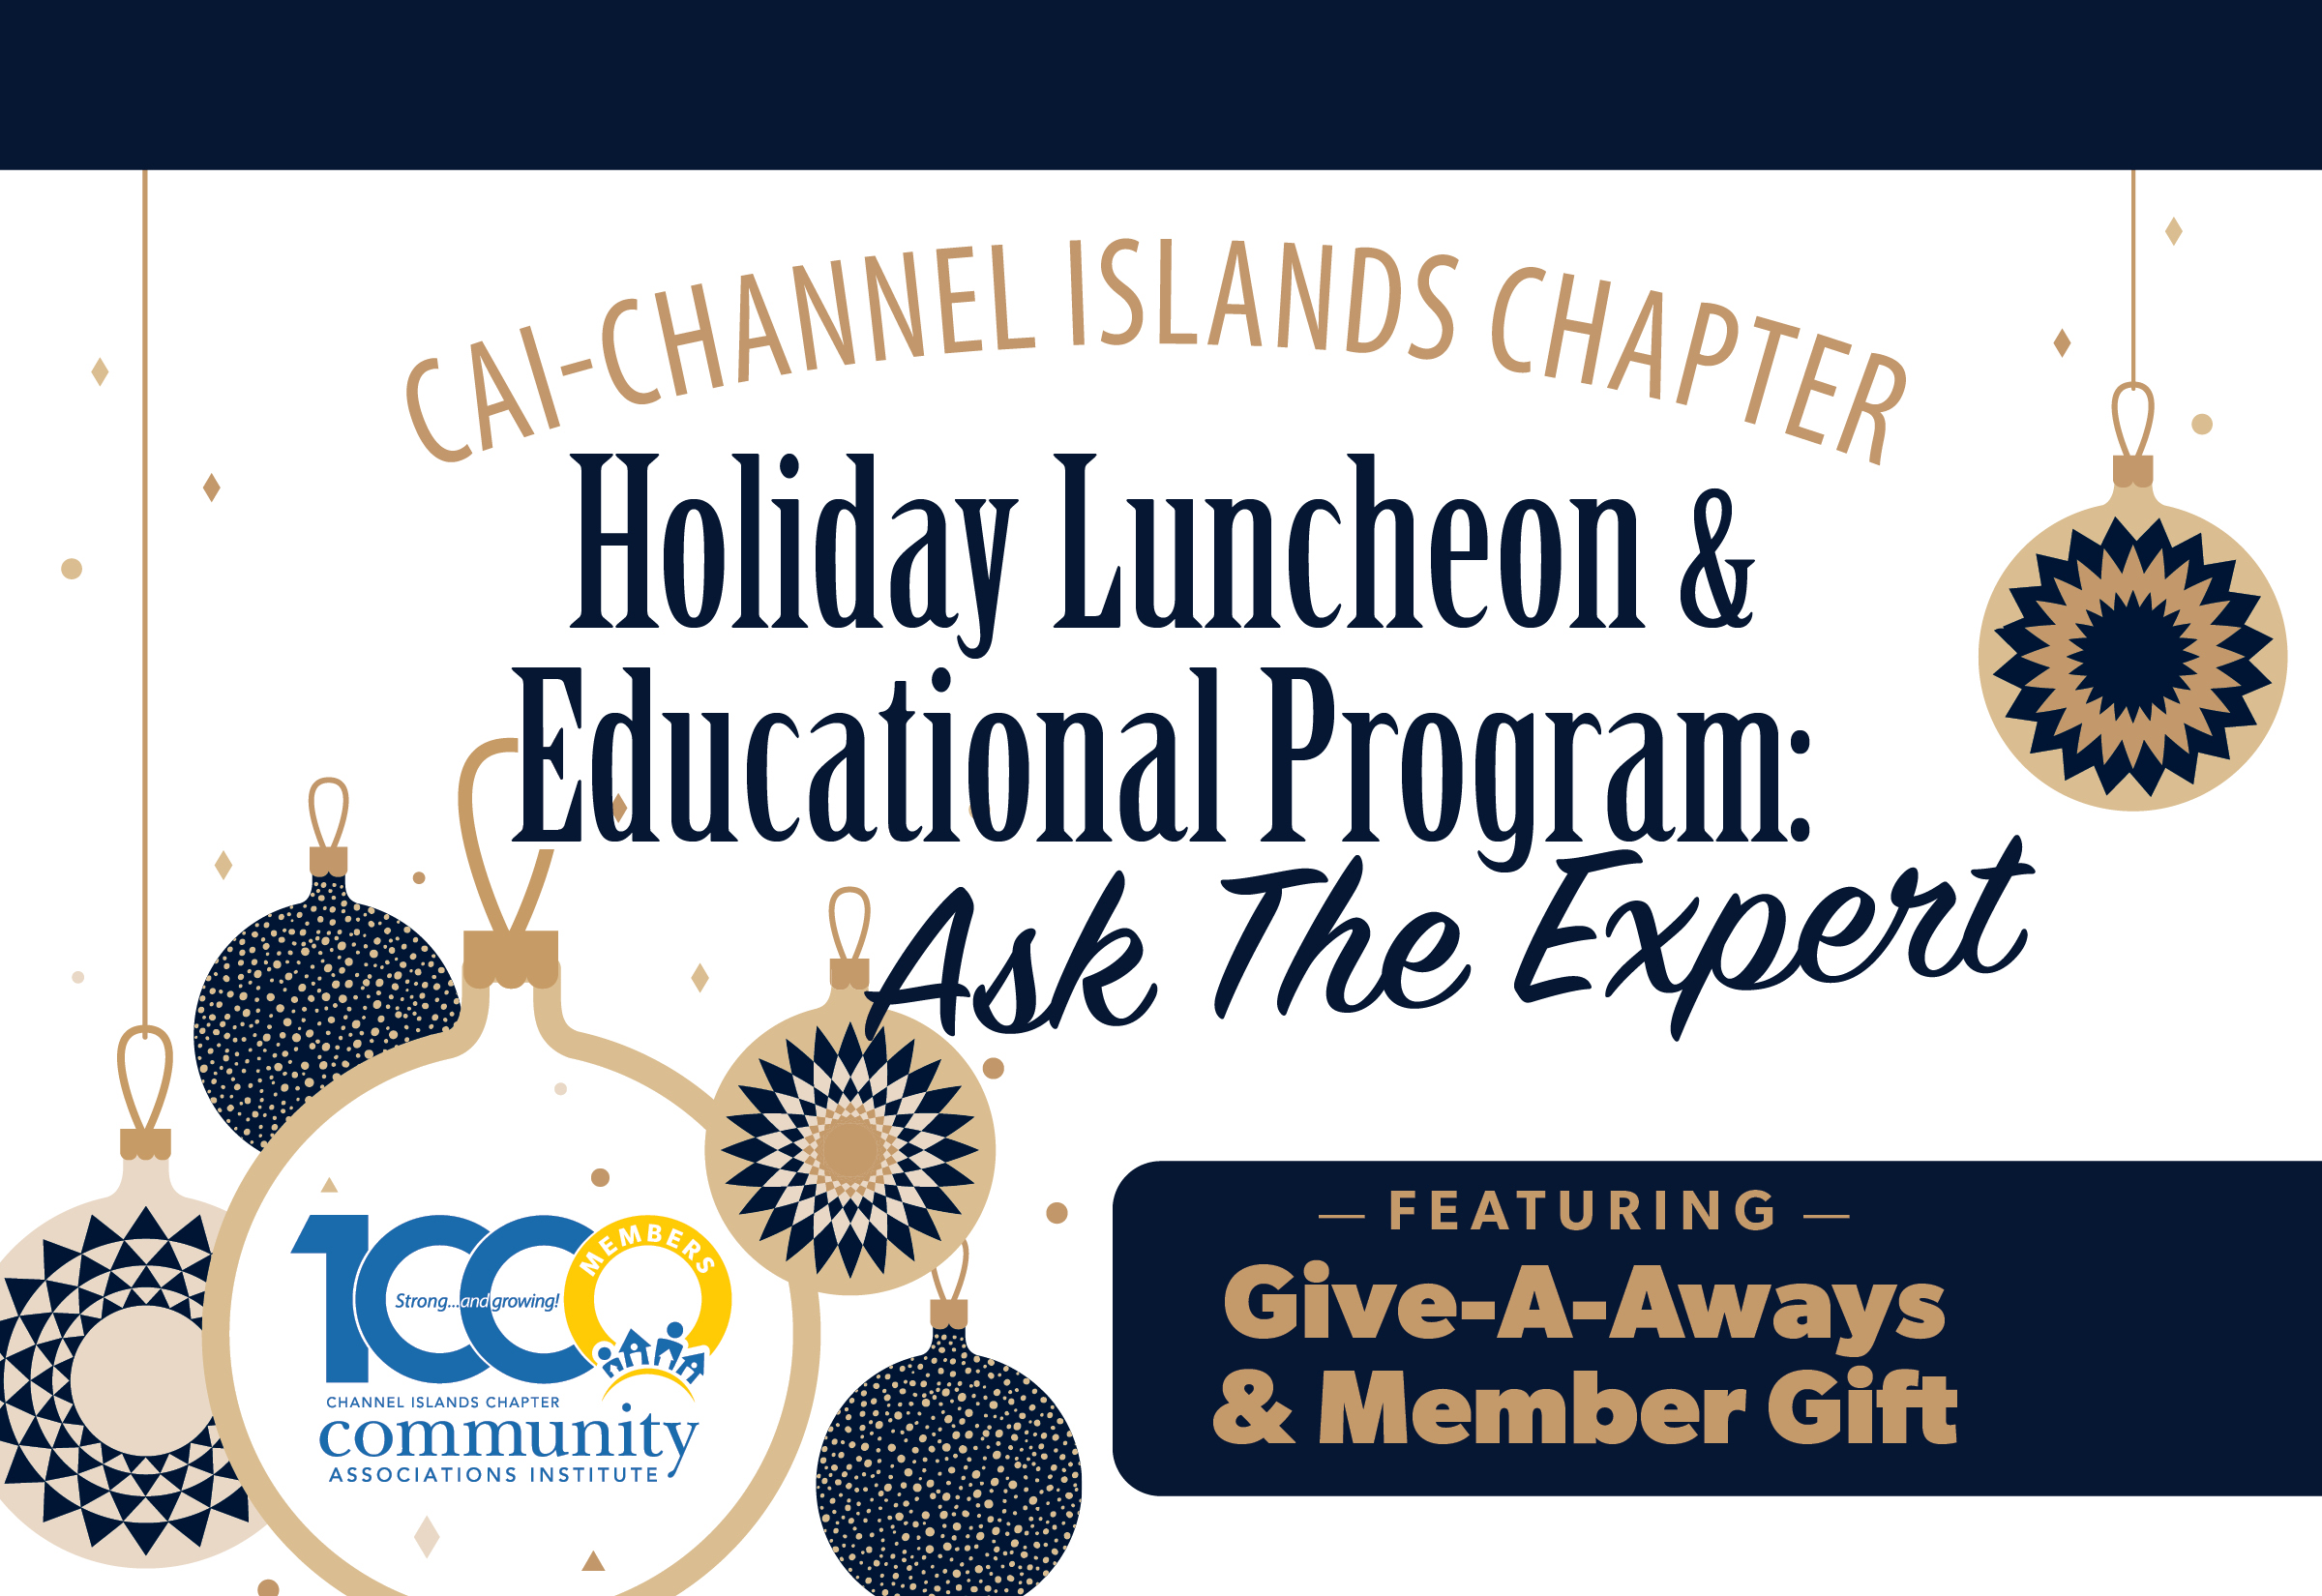 Holiday Luncheon & Educational Program: Ask The Expert